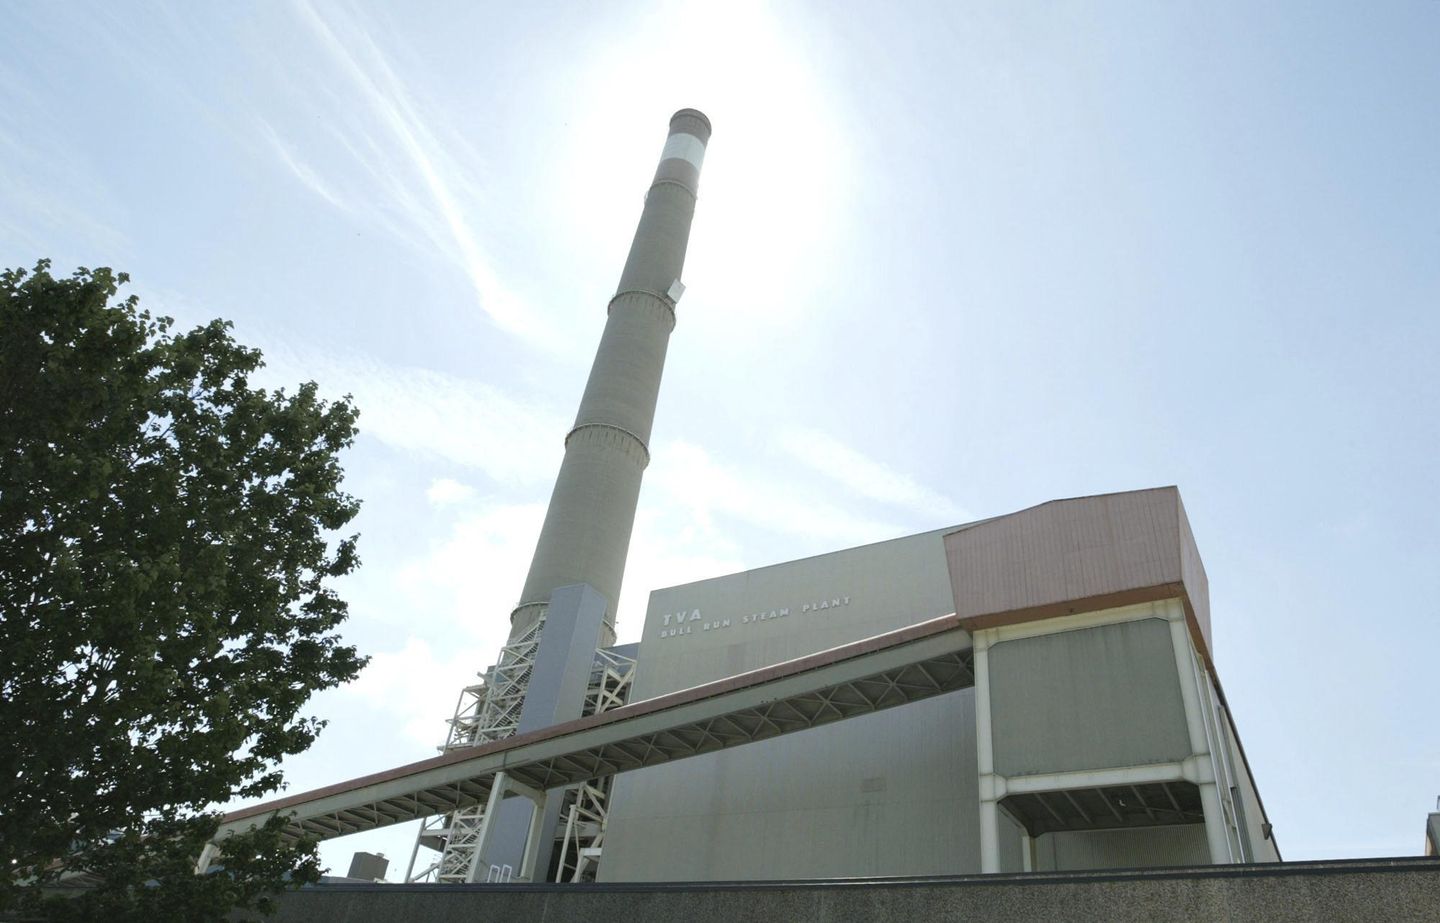 Christmas power outages spur debate over the fossil fuel's future in Tennessee Valley